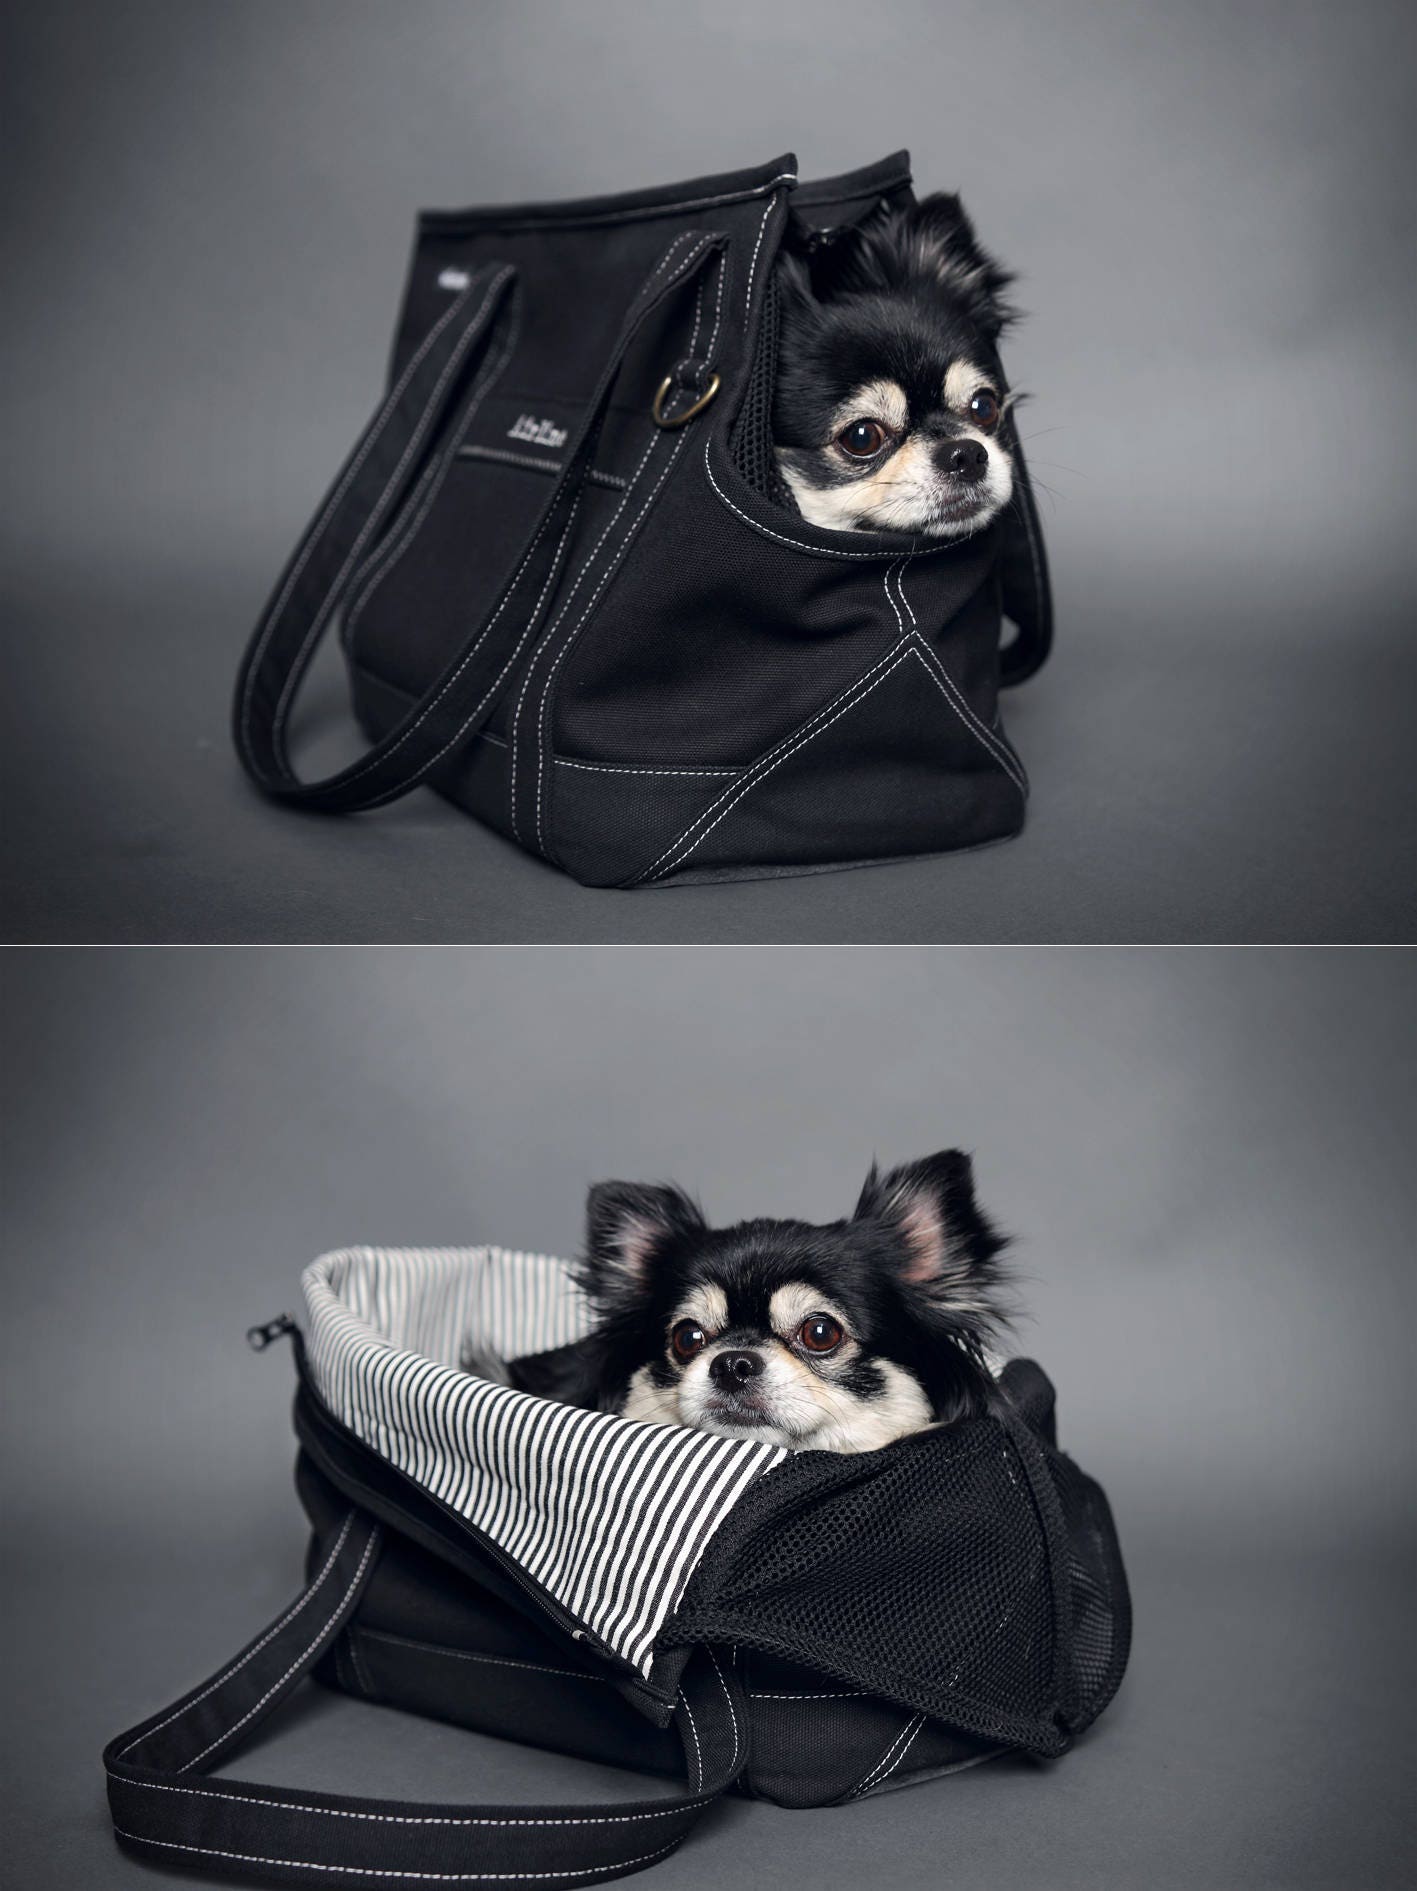 8 Practical Dog Carrier Backpacks for Pups Over 25 lbs - Hey, Djangles.